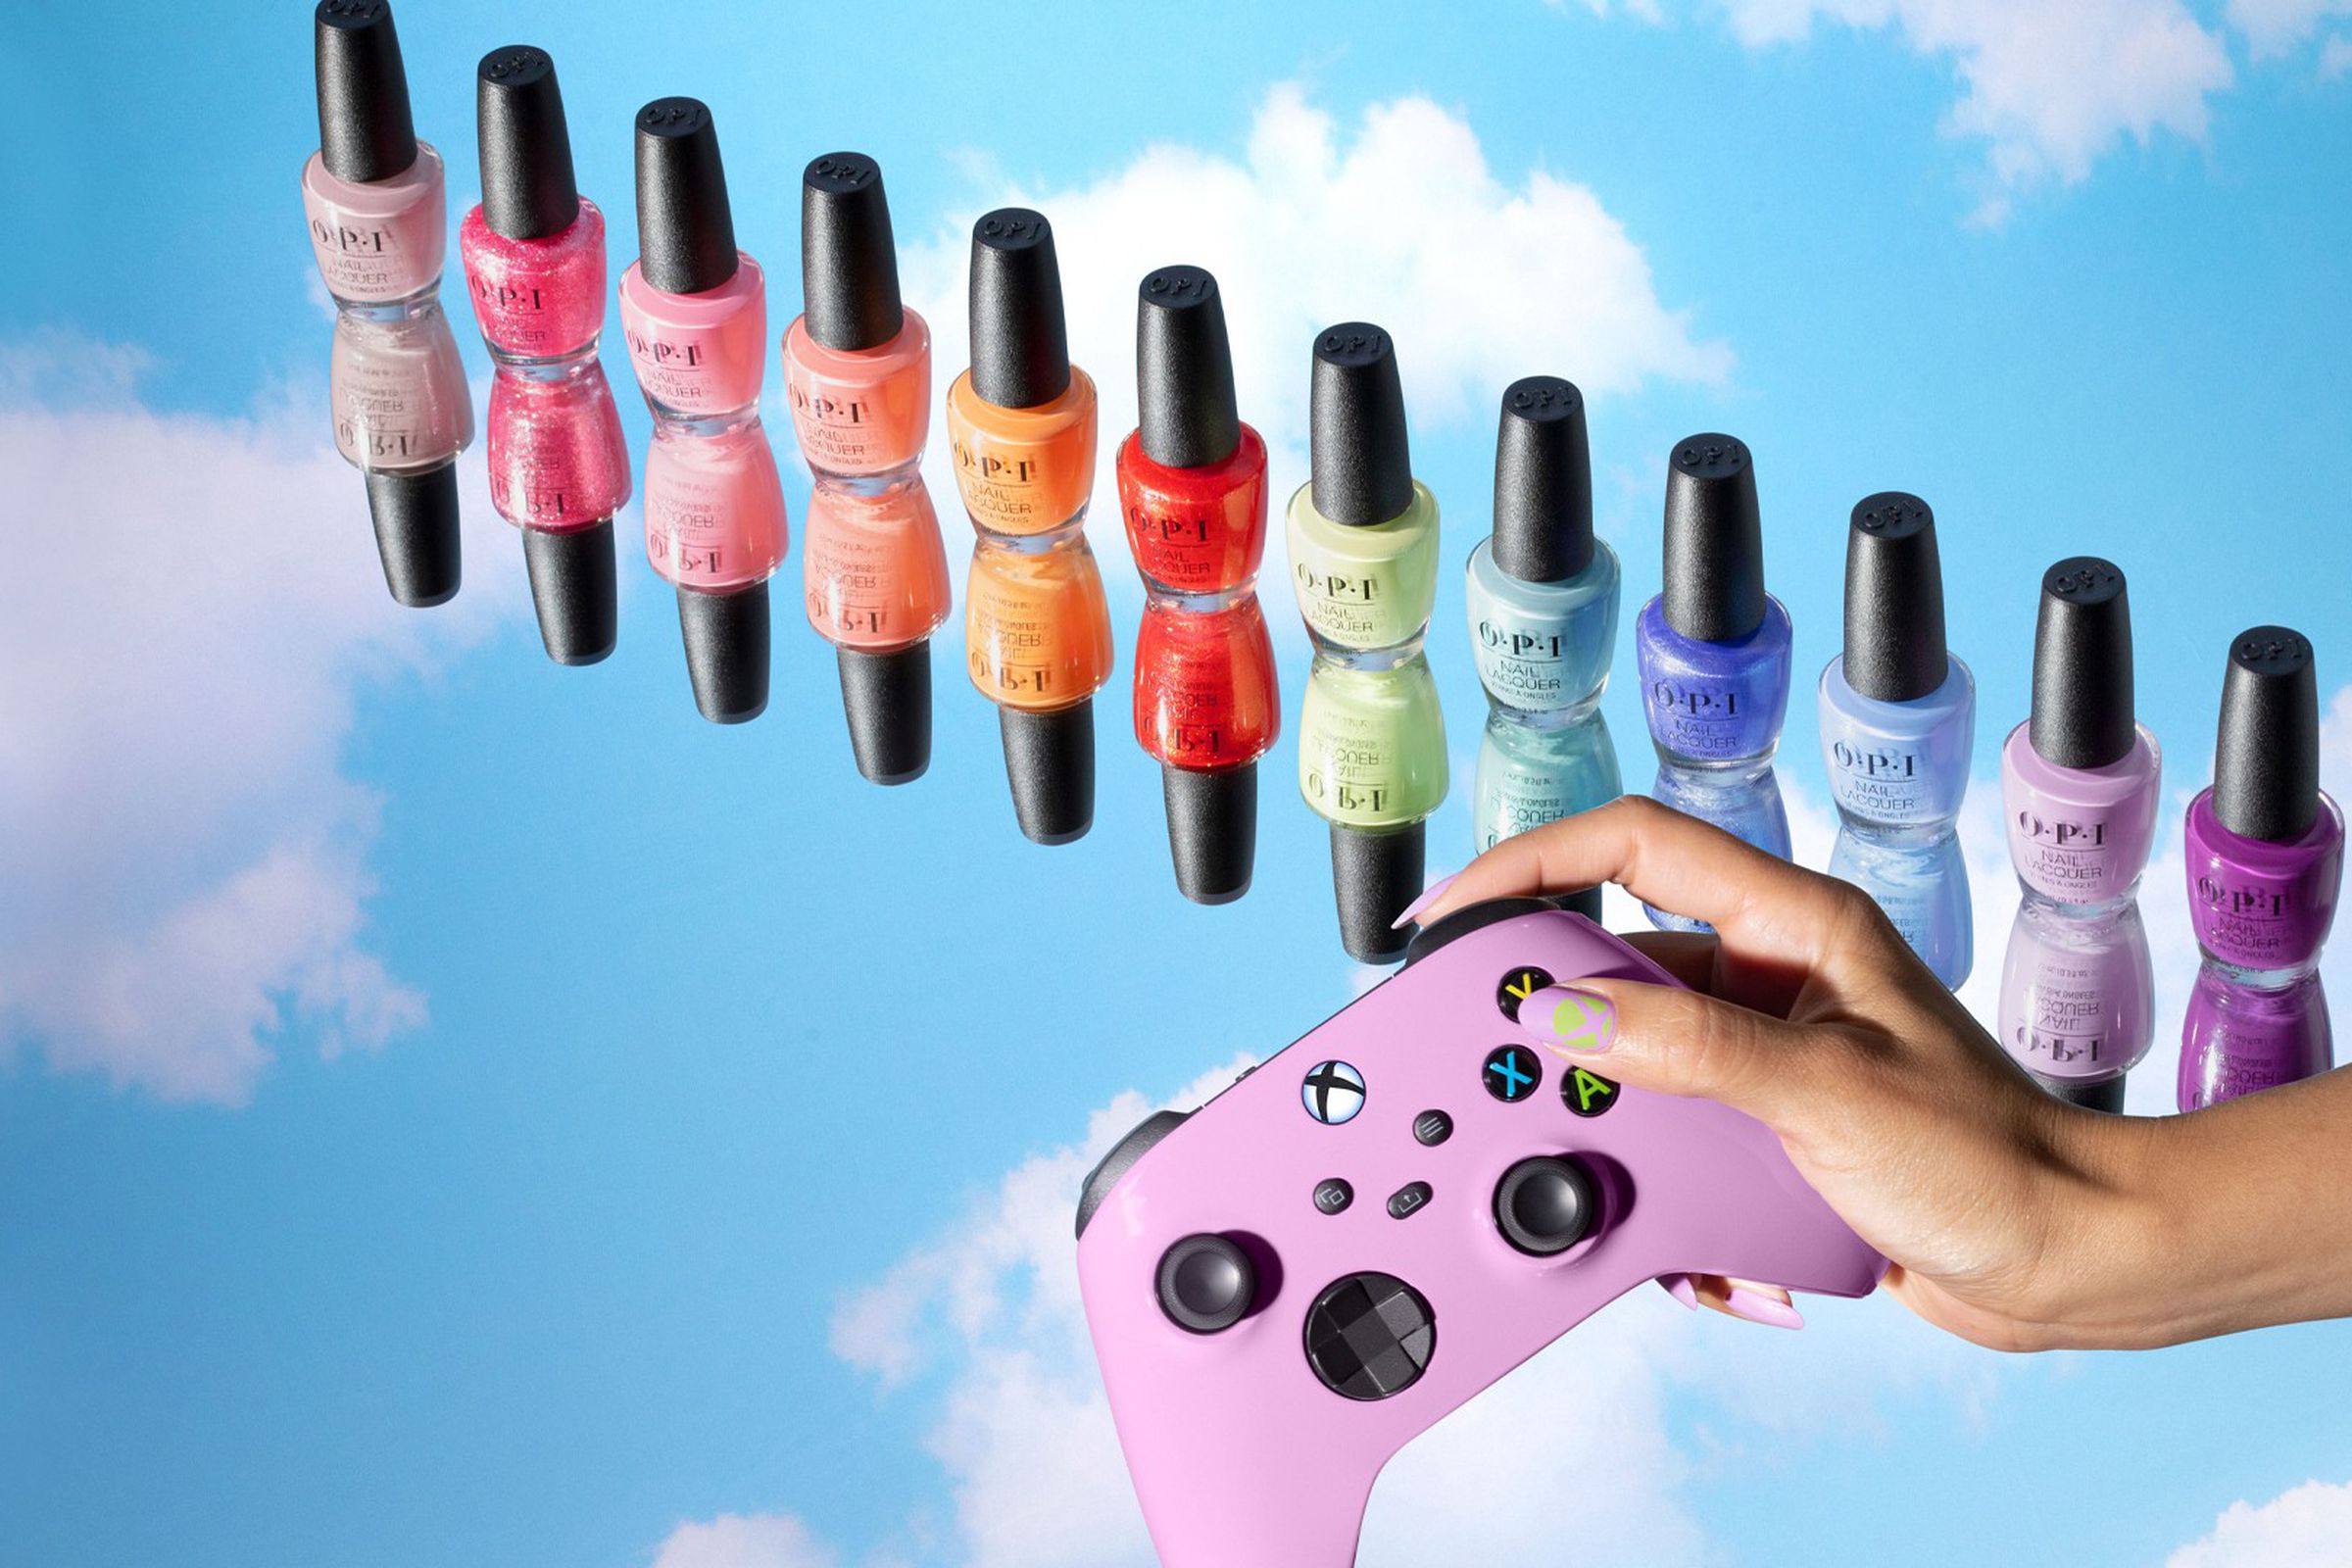 The line consists of 12 colors with cheesy gaming-inspired names.